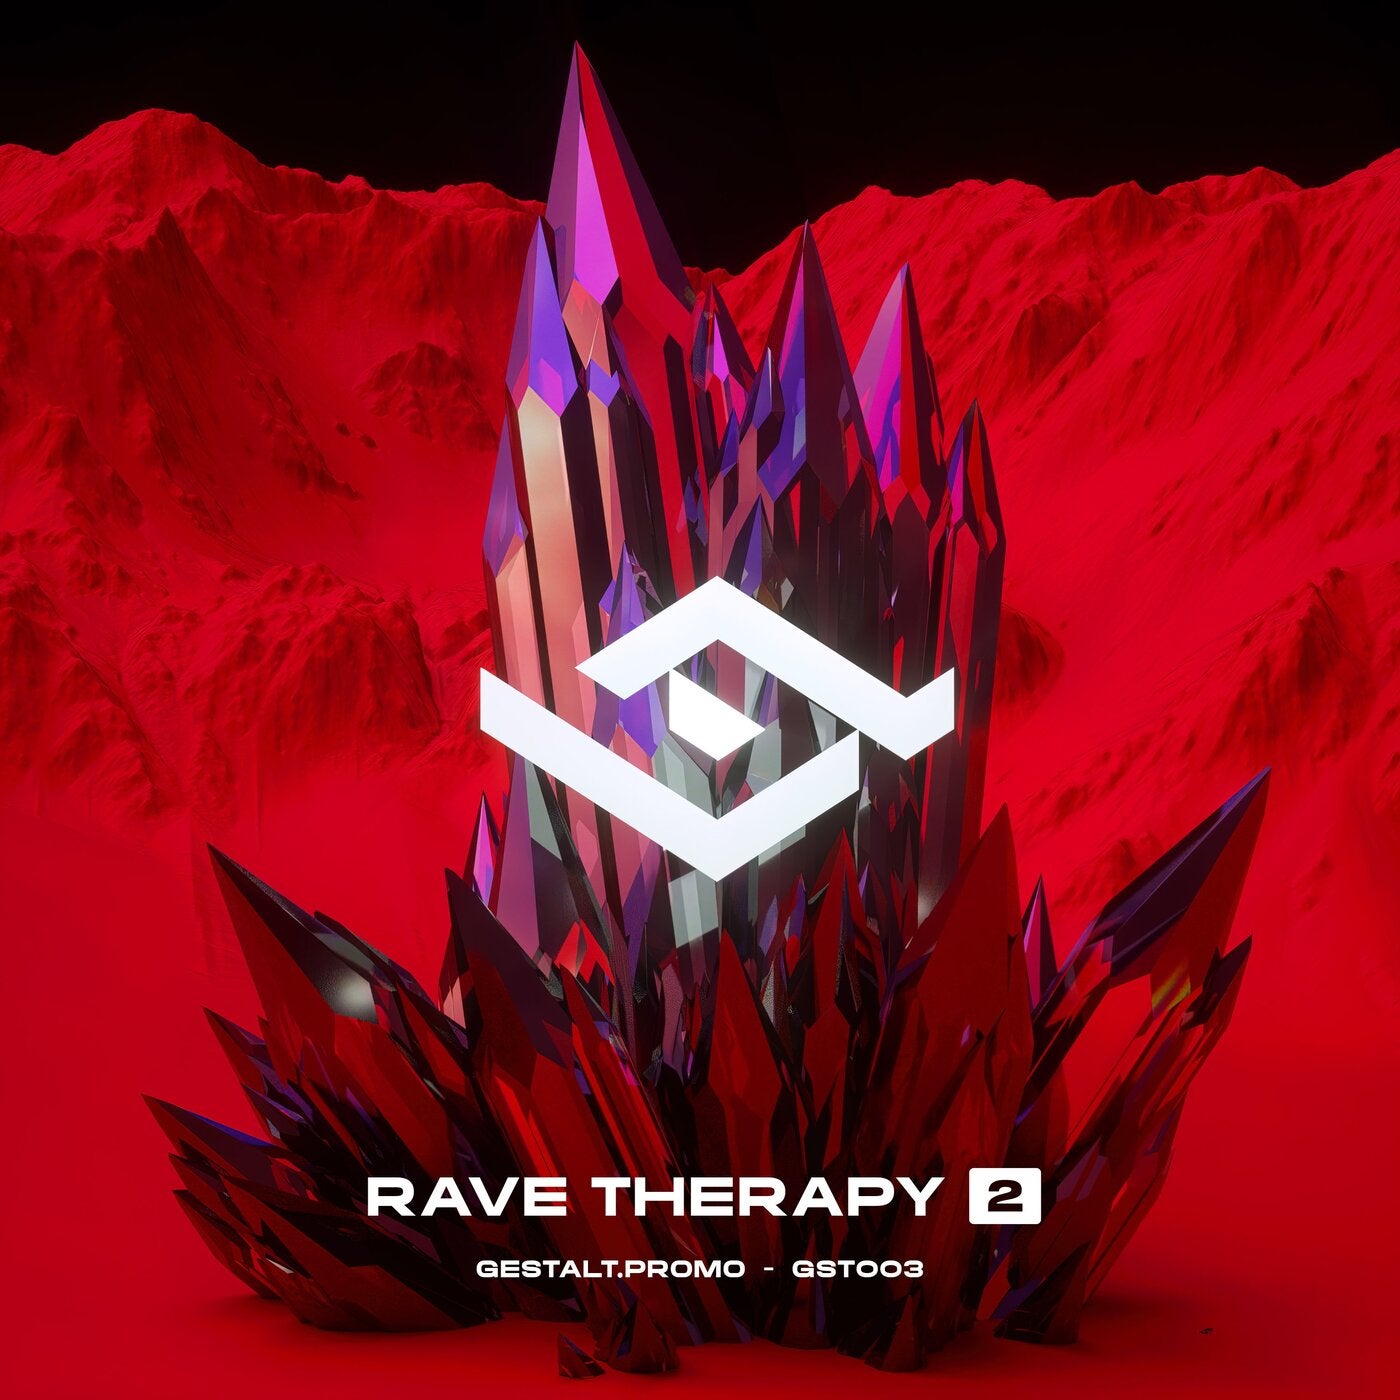 RAVE THERAPY, Vol. 2